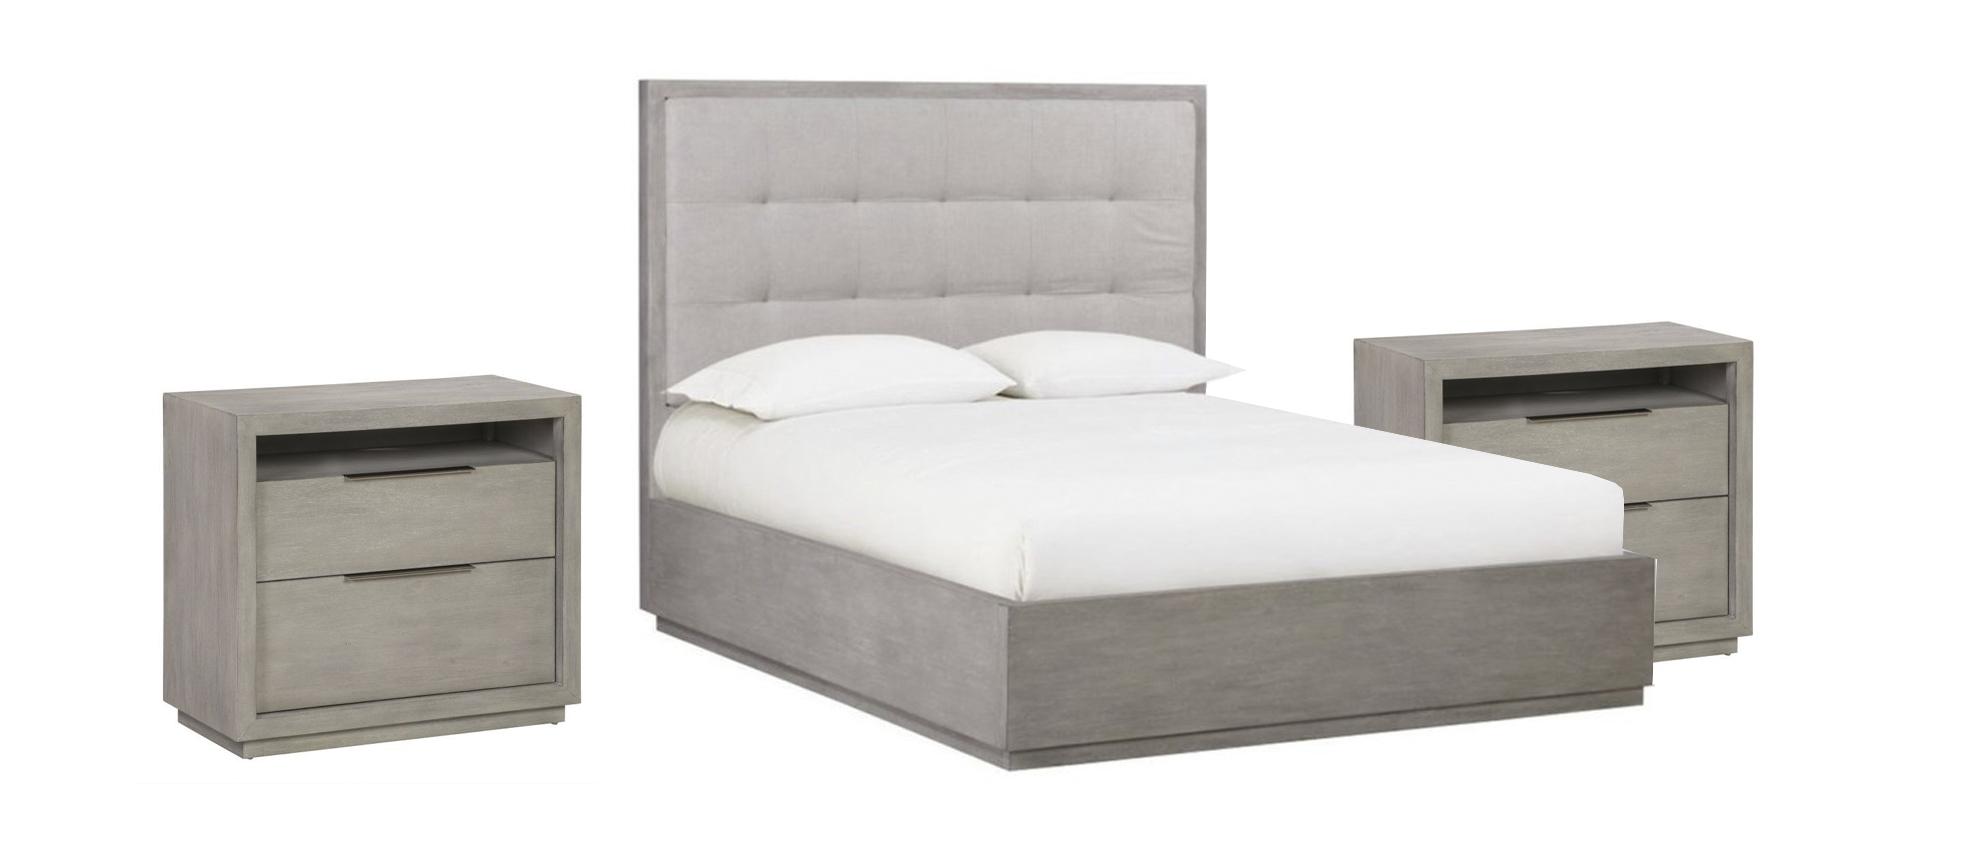 Contemporary Platform Bedroom Set OXFORD AZBXF7-2N-3PC in Light Gray, Stone Fabric